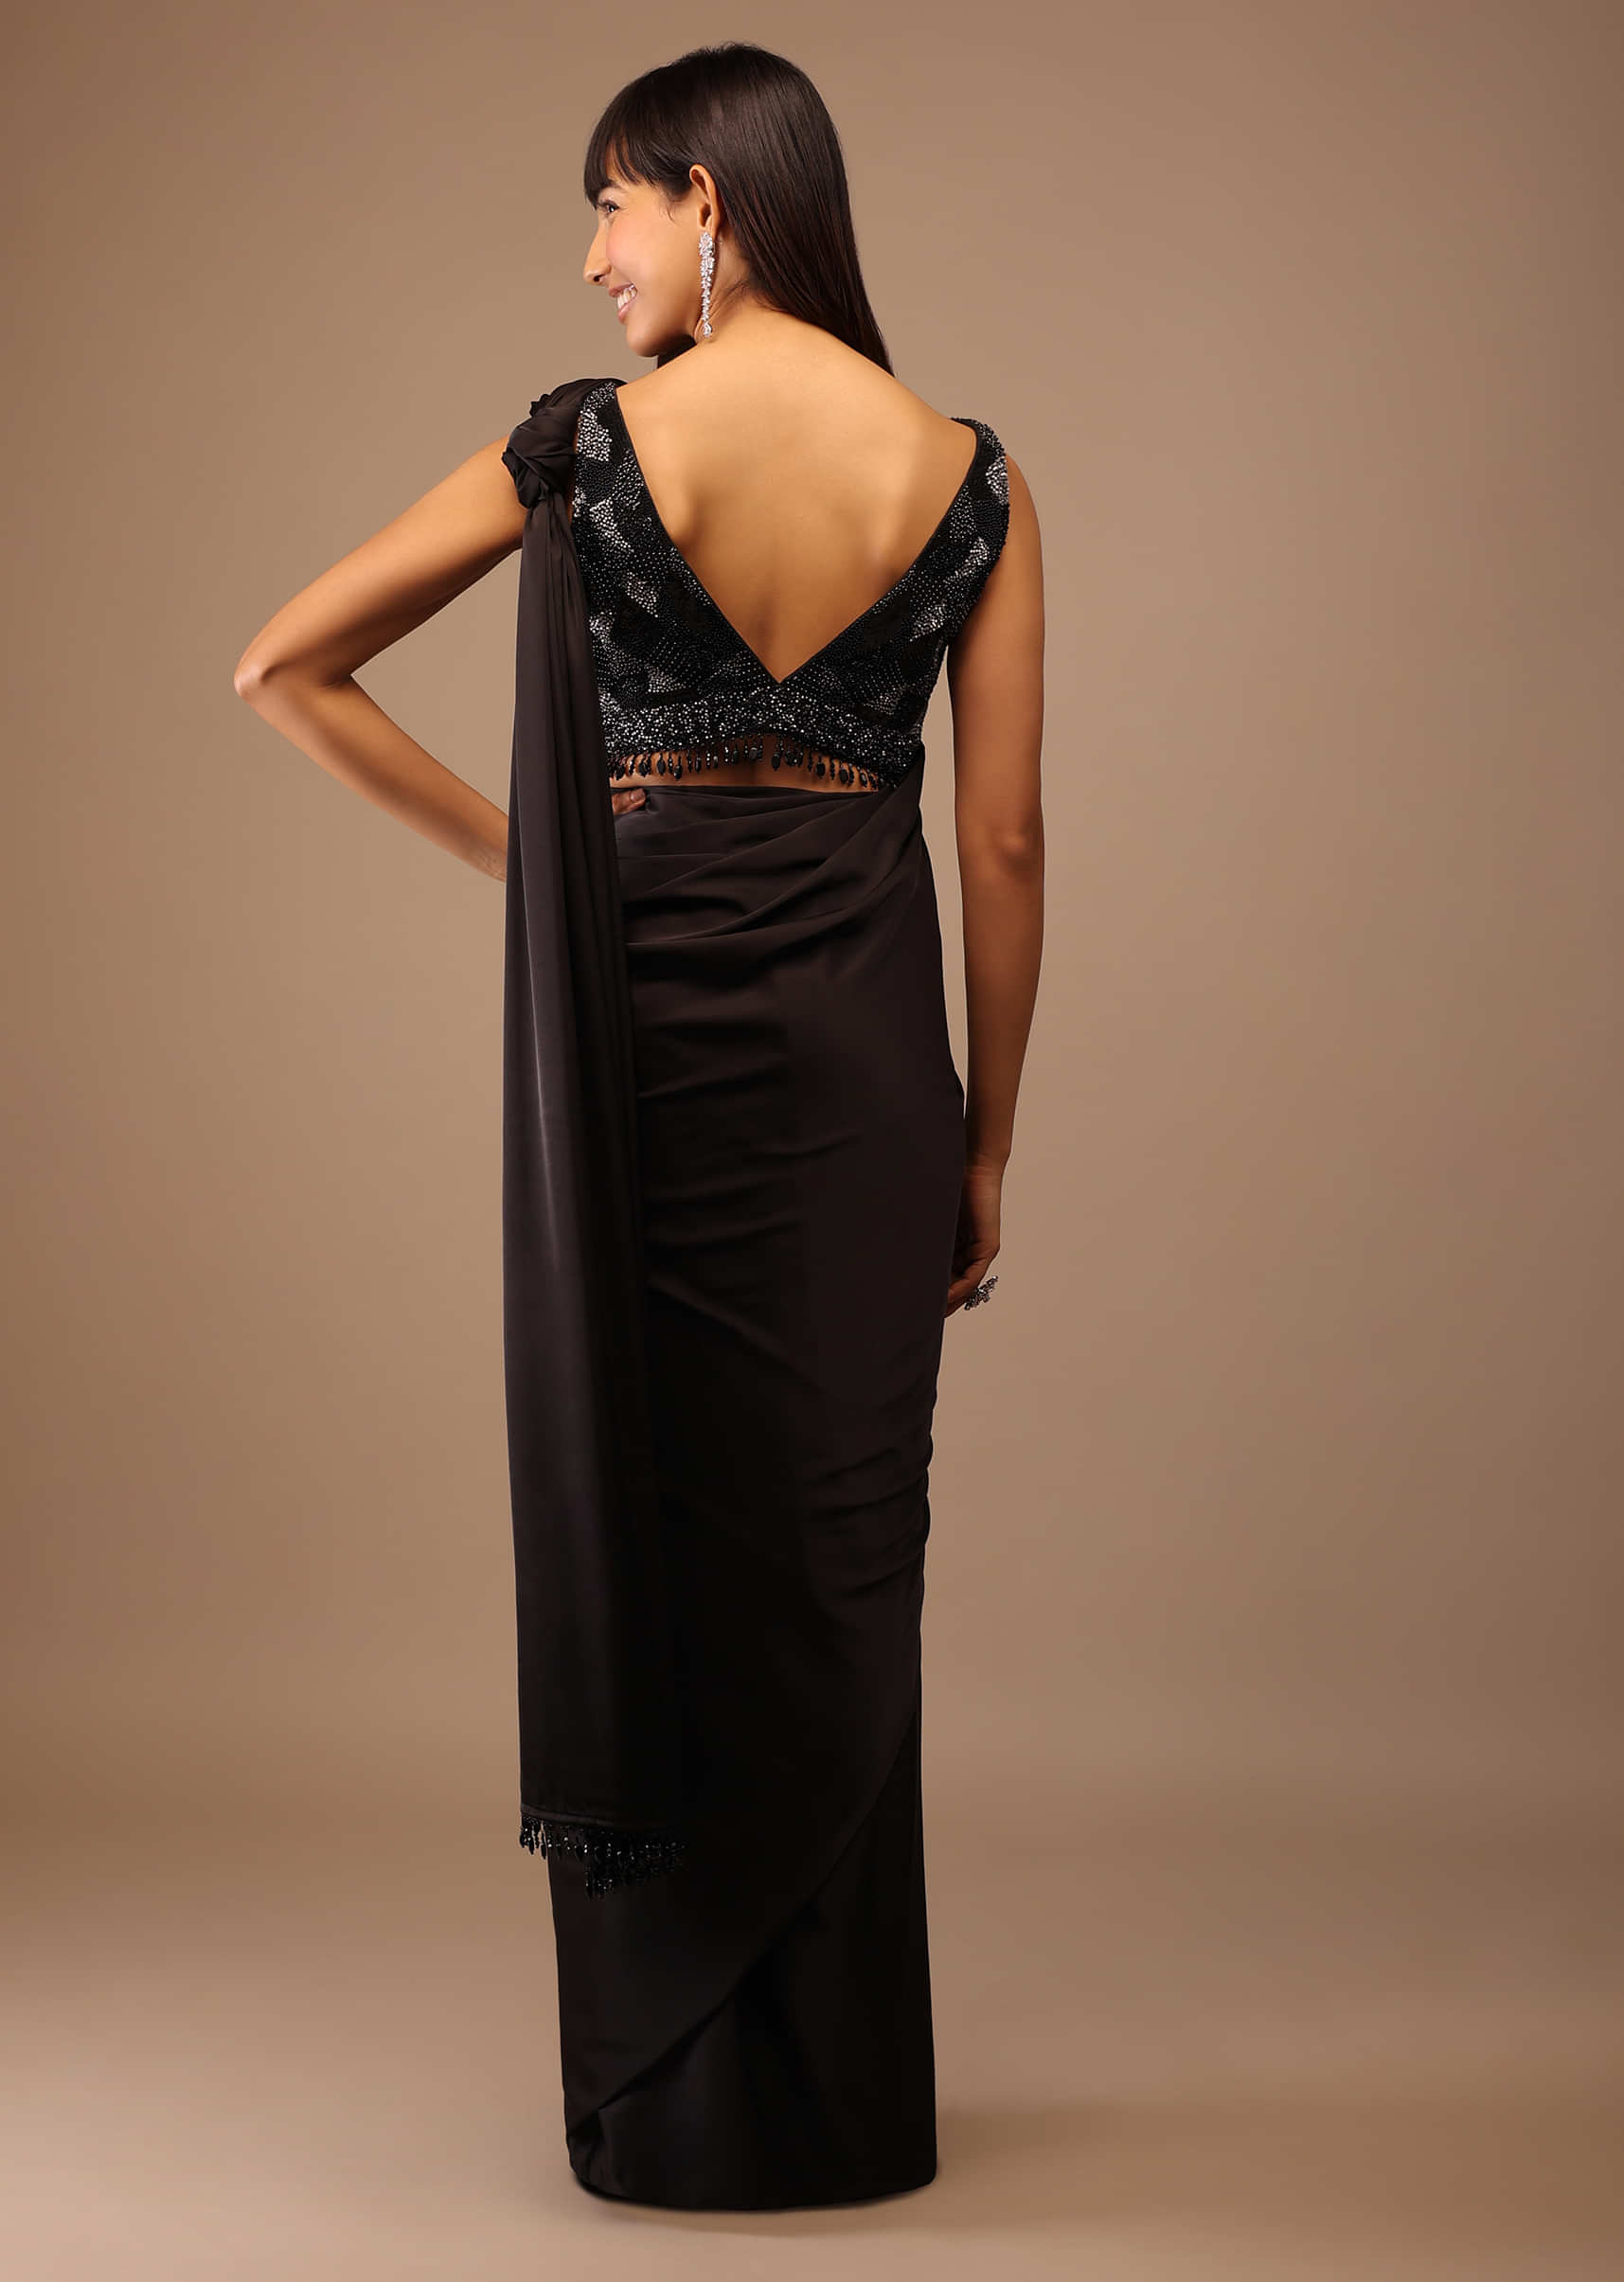 Black Satin Saree With Hand Embroidered Blouse With Fringes On The Hem